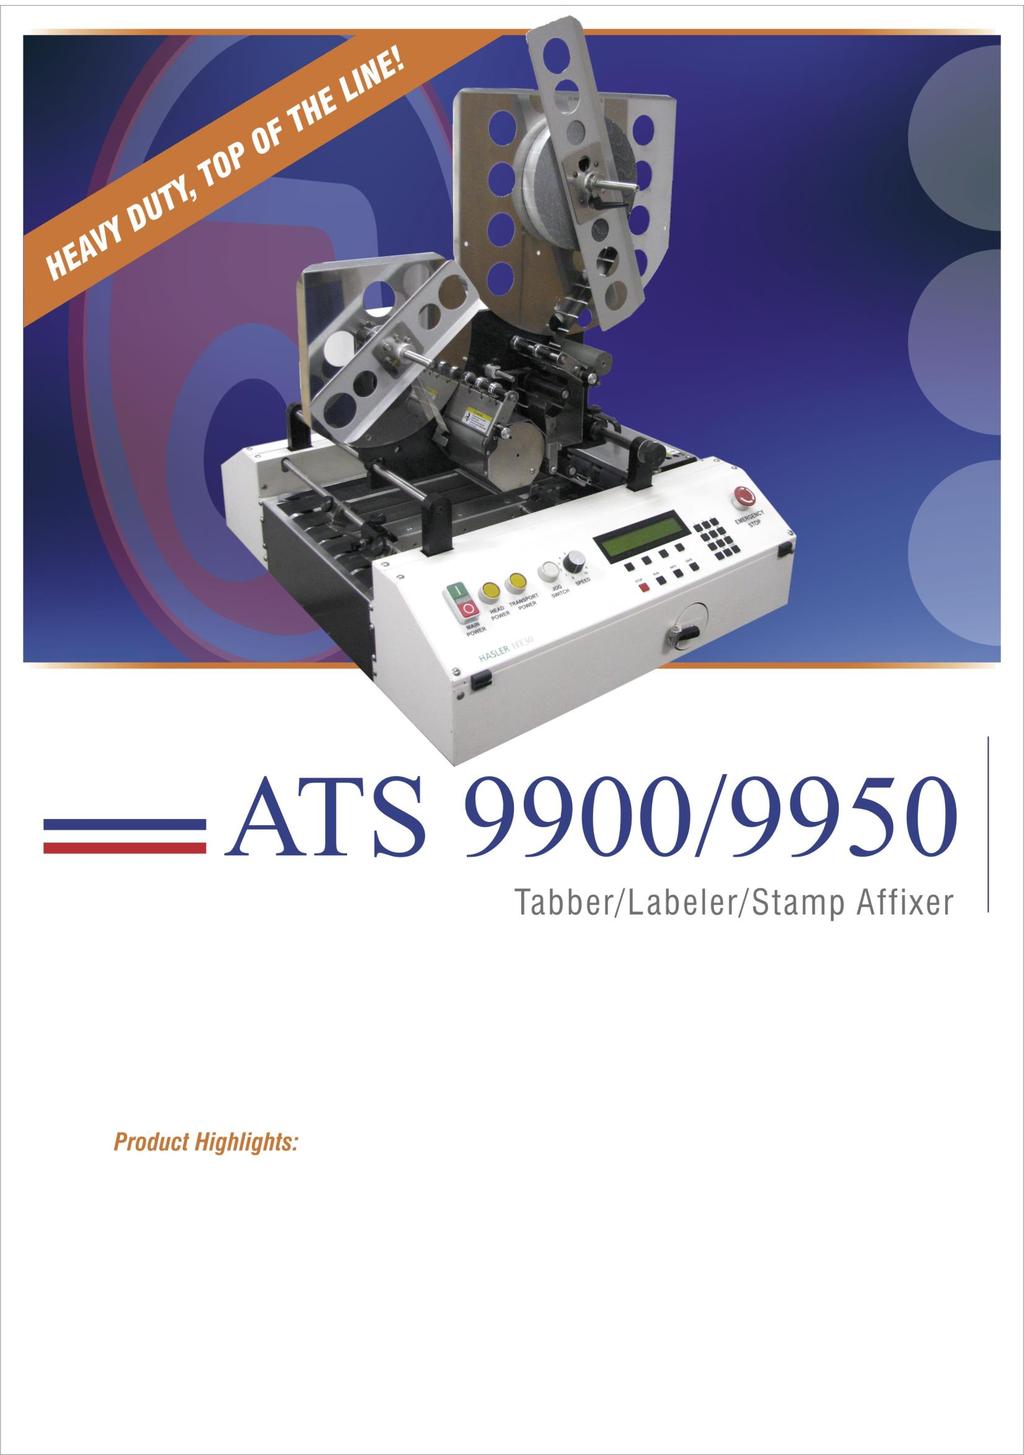 The ATS-9900/9950 Wide-Head Tabber/Affixer is a topflight system for accurate, tight tabs. This high productivity unit operates inline or as a standalone.